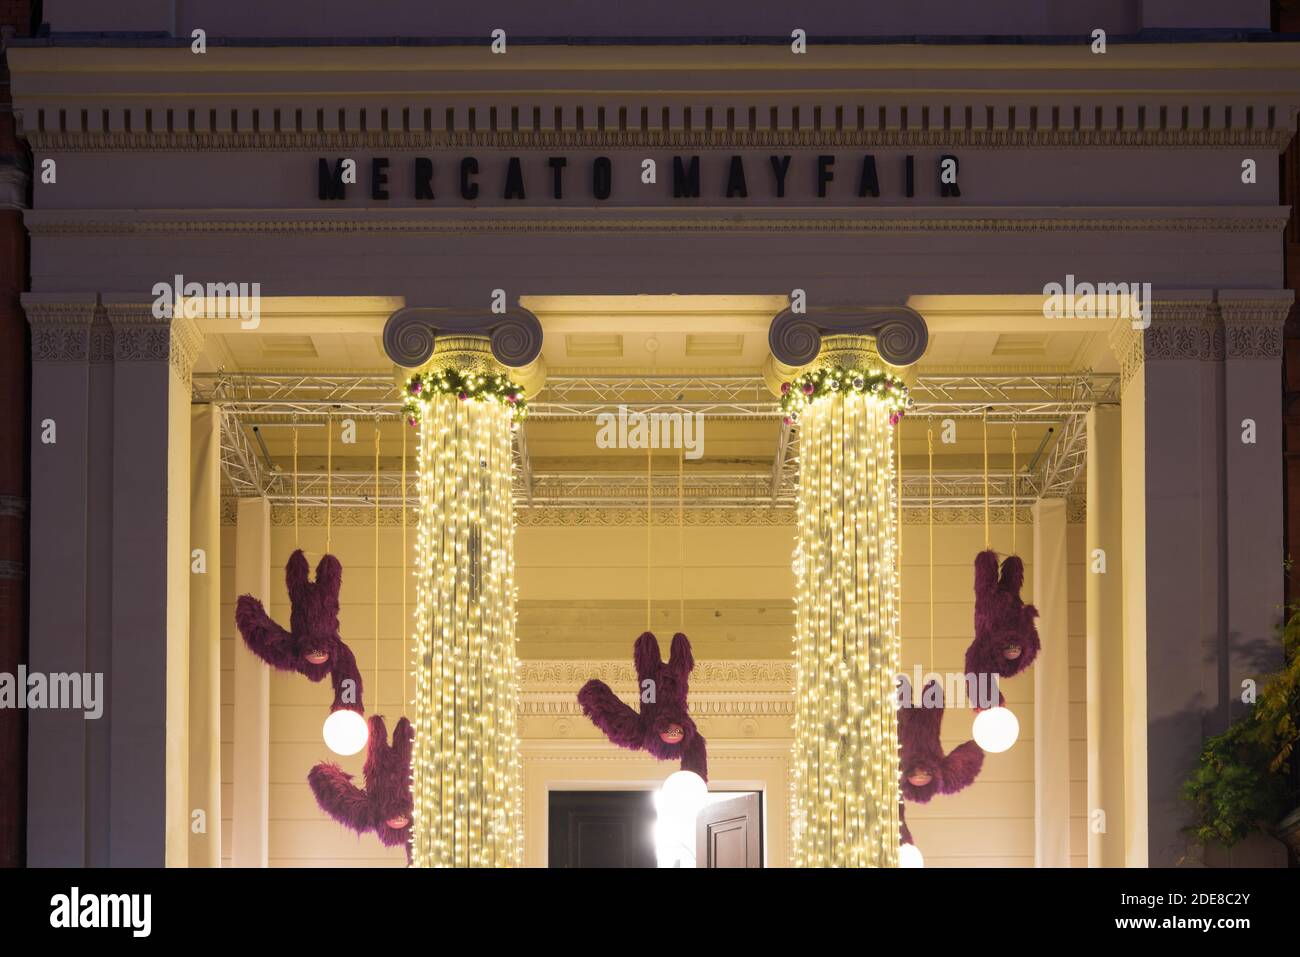 Greek Revival Architecture Ionic Columns Yellow Christmas Lights Mercato Metropolitano Mayfair, North Audley Street, West End, Mayfair, London W1K Stock Photo